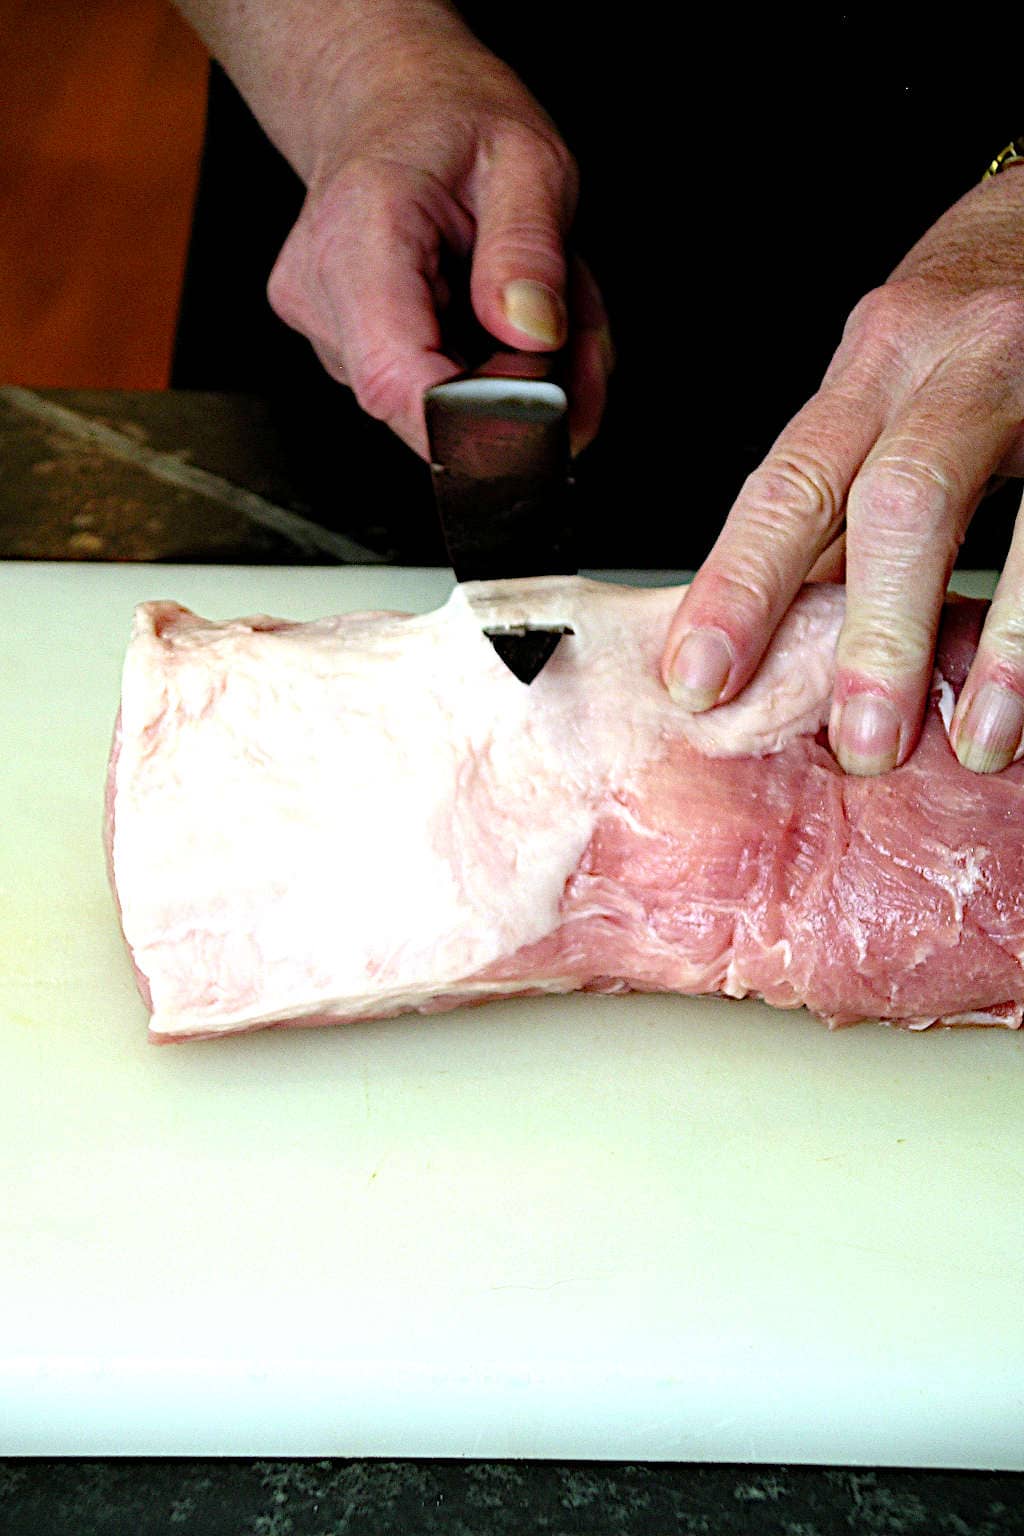 Trimming silverskin from the pork